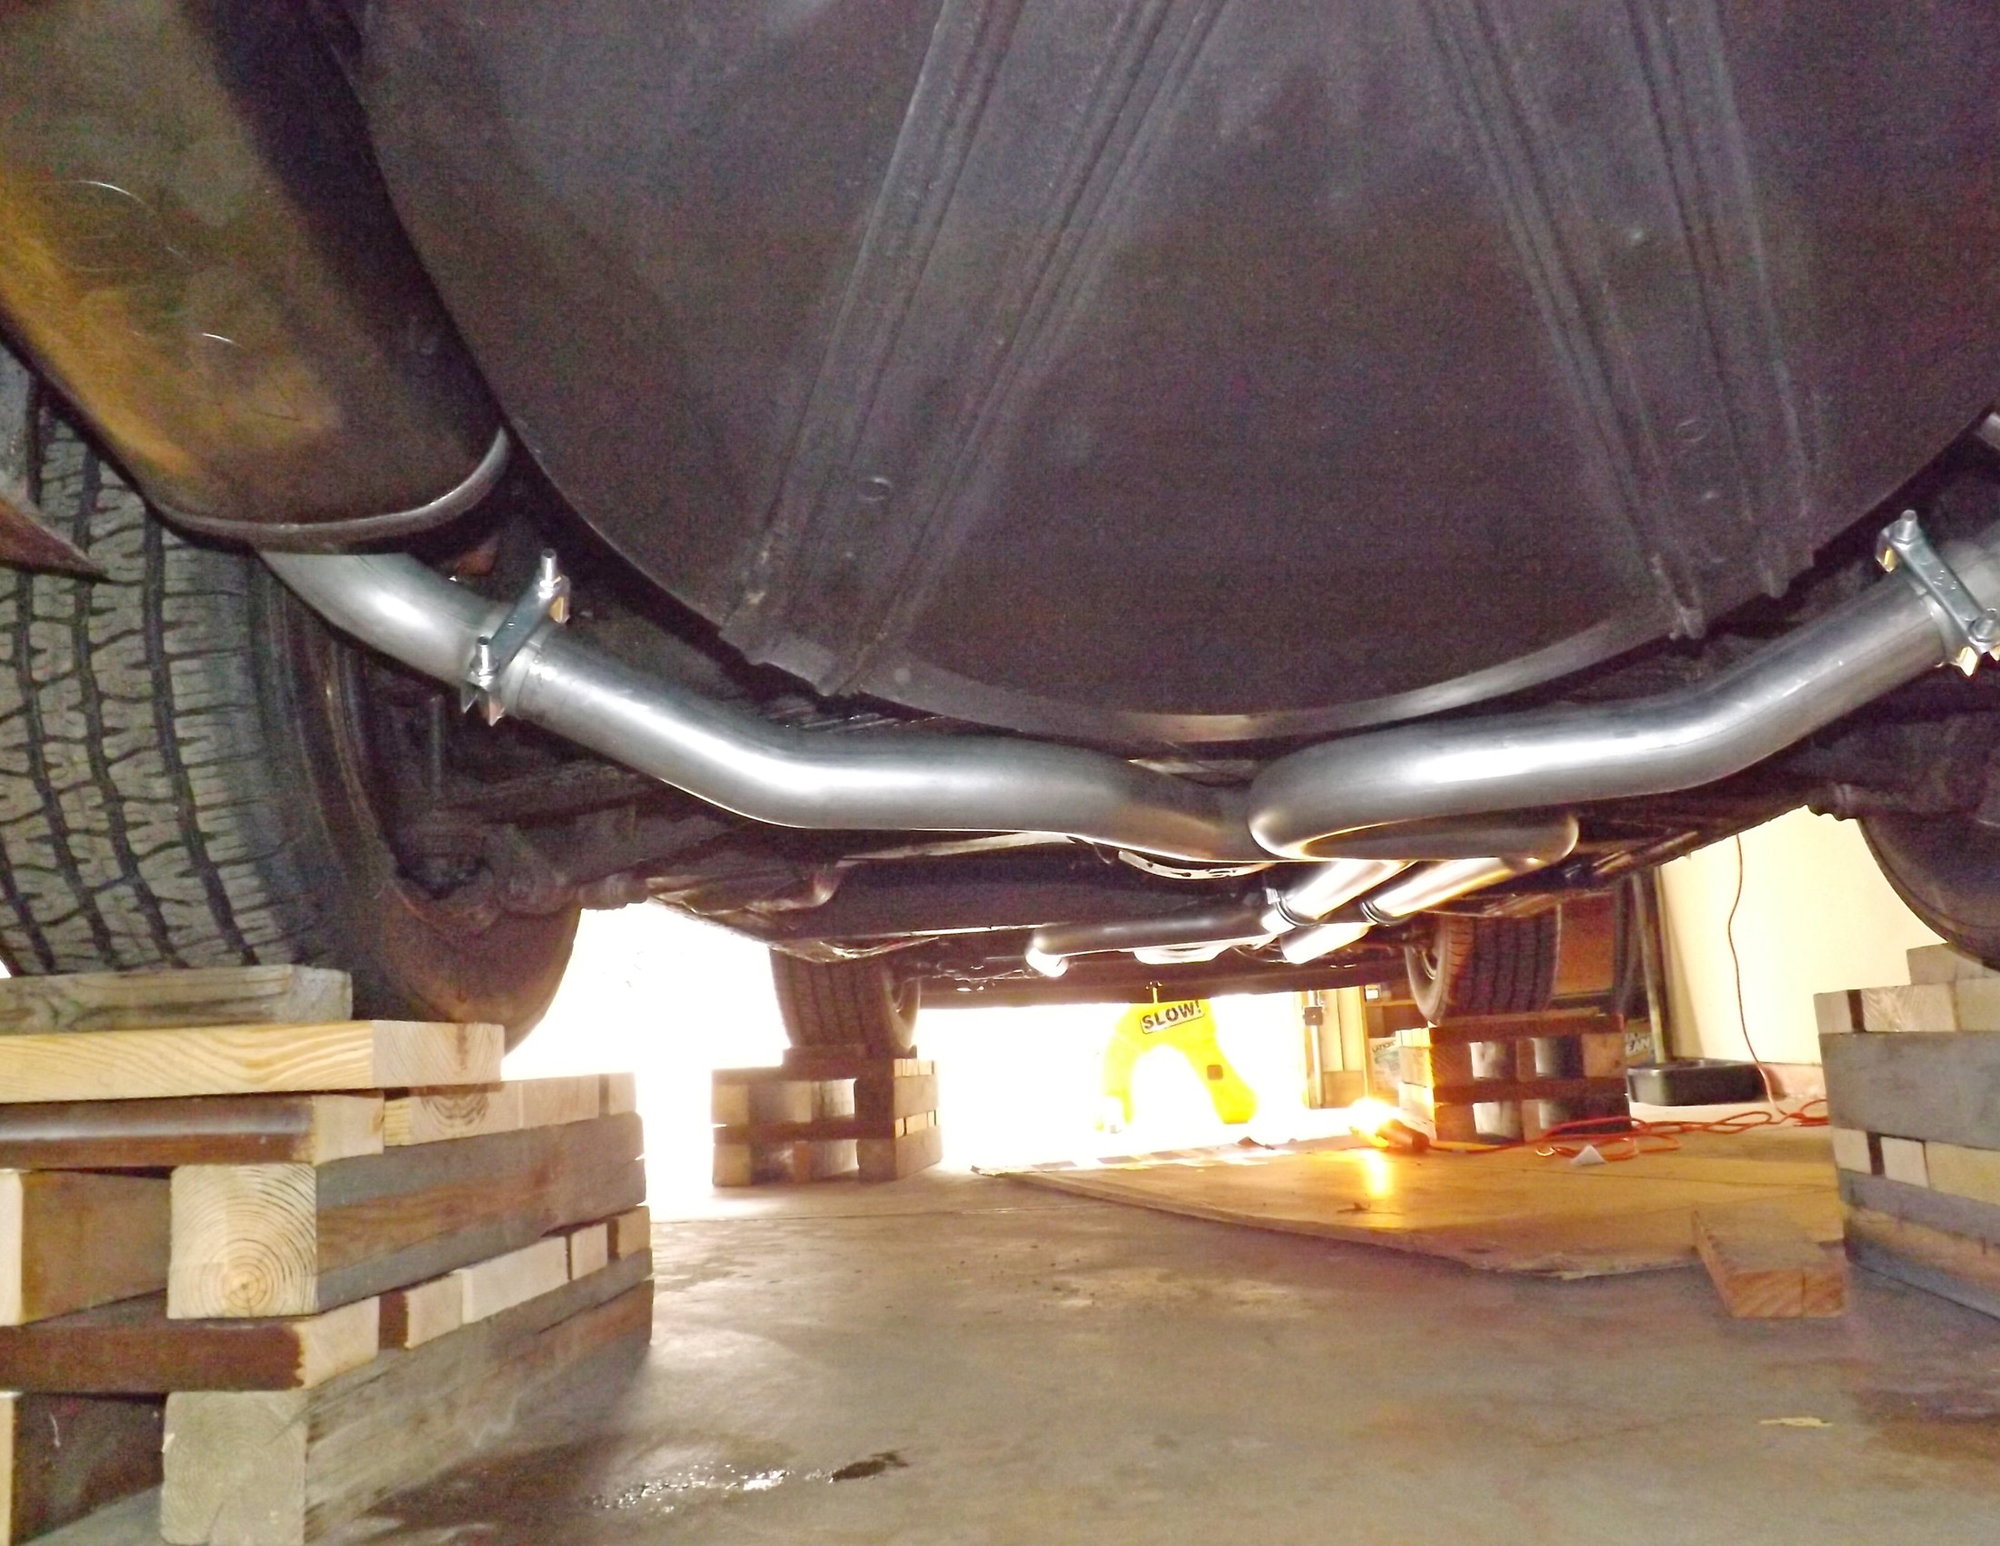 Pics/advice wanted - Corvette Central dual exhaust for a 79